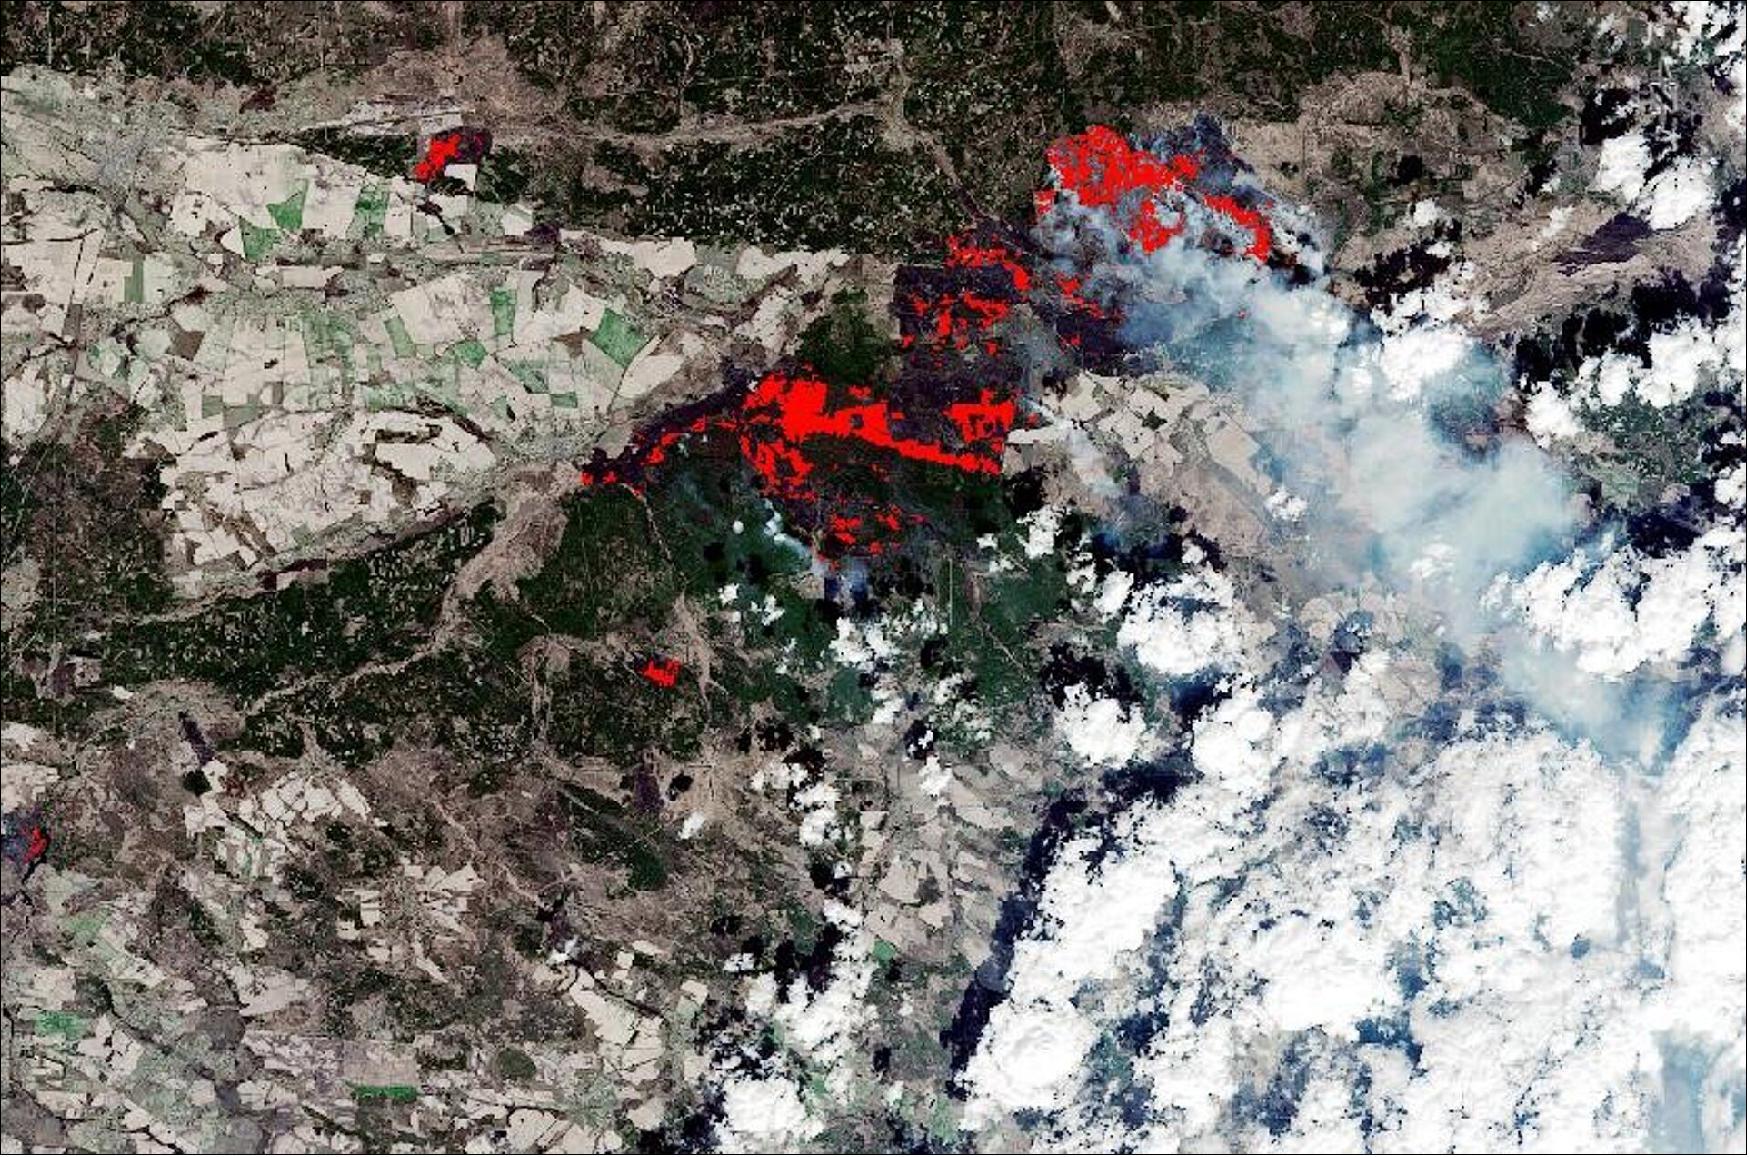 Figure 46: This extract of a burned area mapping product was generated by the CIMA Foundation and Fadeout using the WASDI processing environment. It is based on images acquired by Copernicus Sentinel-2 on 26 March and 10 April 2020. It shows the burned area around Chernobyl in the Ukraine on 10 April following an outbreak of wildfires. CIMA Foundation is leading an ESA project called eDRIFT that is looking at Disaster Risk Financing using Cloud processing of Copernicus Sentinel imagery (image credit: ESA, the image contains Copernicus Sentinel data (2020), processed by CIMA Foundation and Fadeout srl)